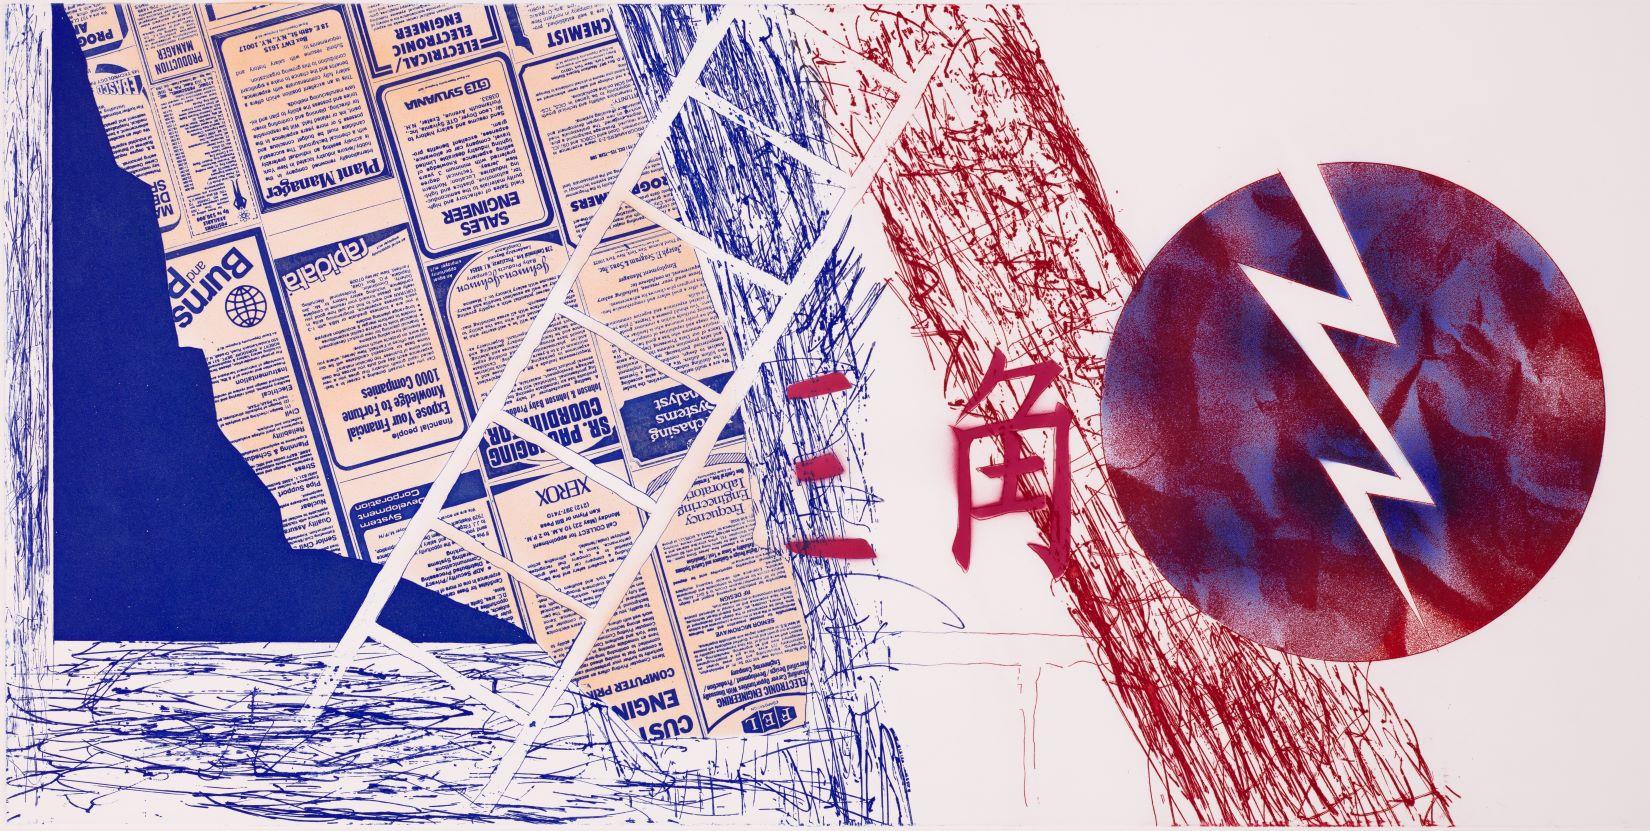 Wind and Lightning (State I) is an aquatint etching with pochoir on paper, 22.75 x  39.75 inches, signed 'James Rosenquist' and dated 1978 lower right; numbered 19/78 and titled lower left. From the edition of 127 (there were also 24 AP, 11 CTP, 2